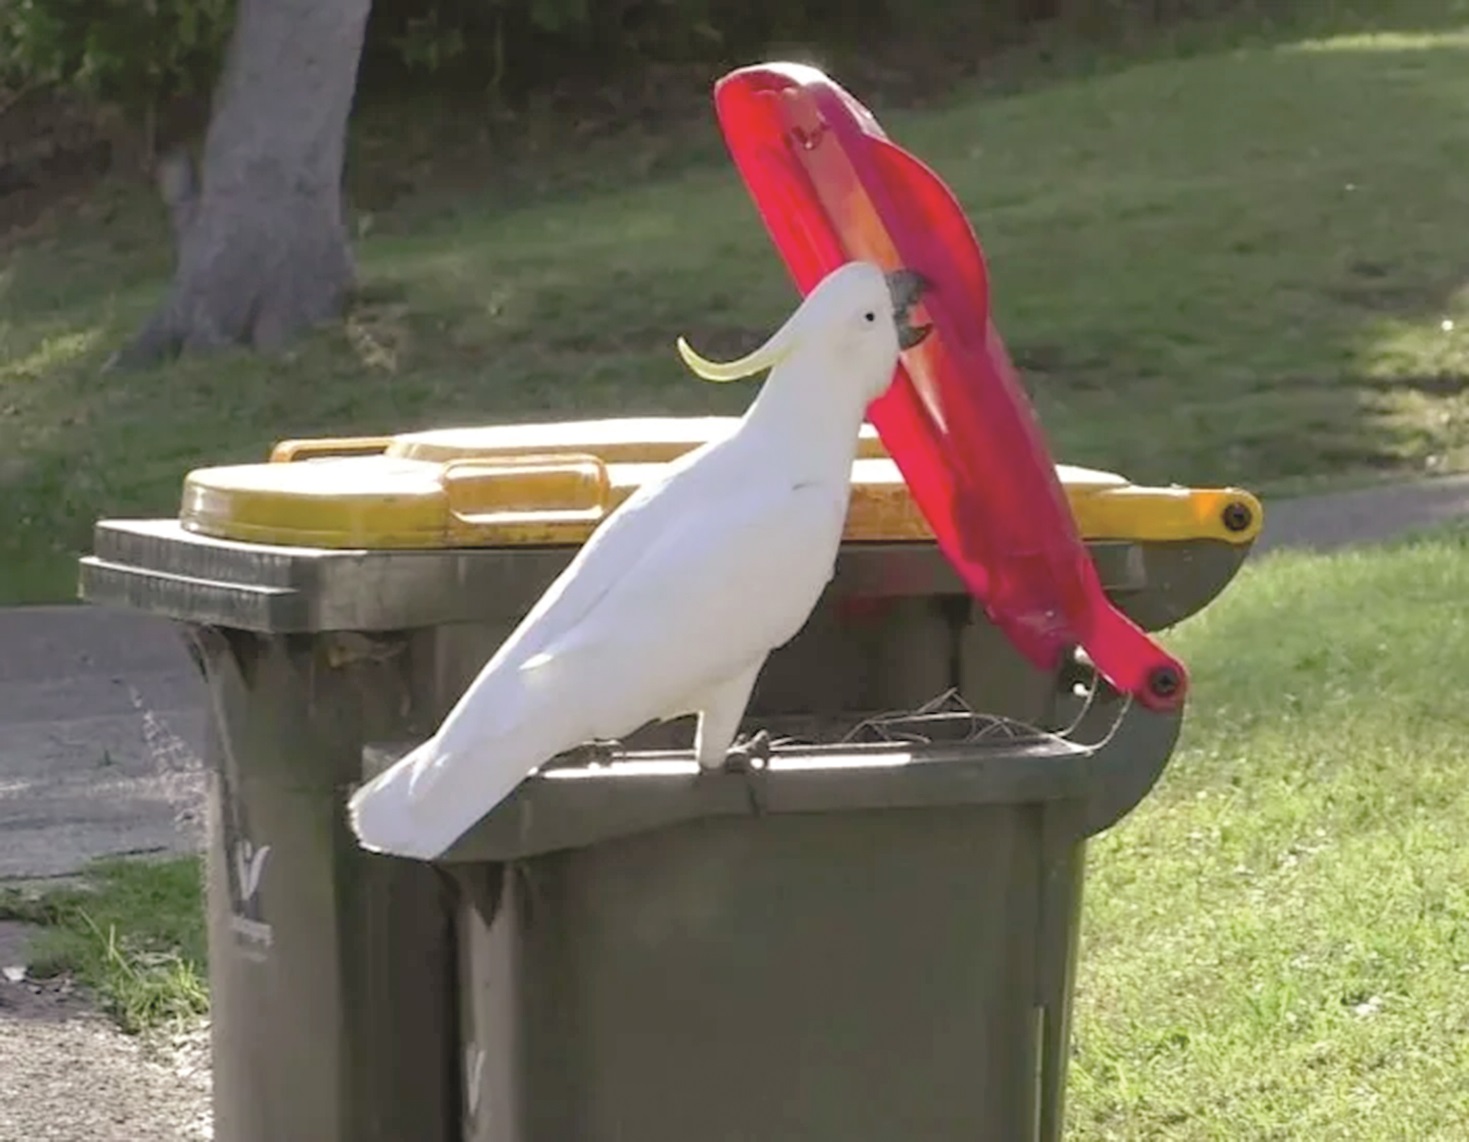 A dumpster lid or two won’t stop a cockatoo from feasting